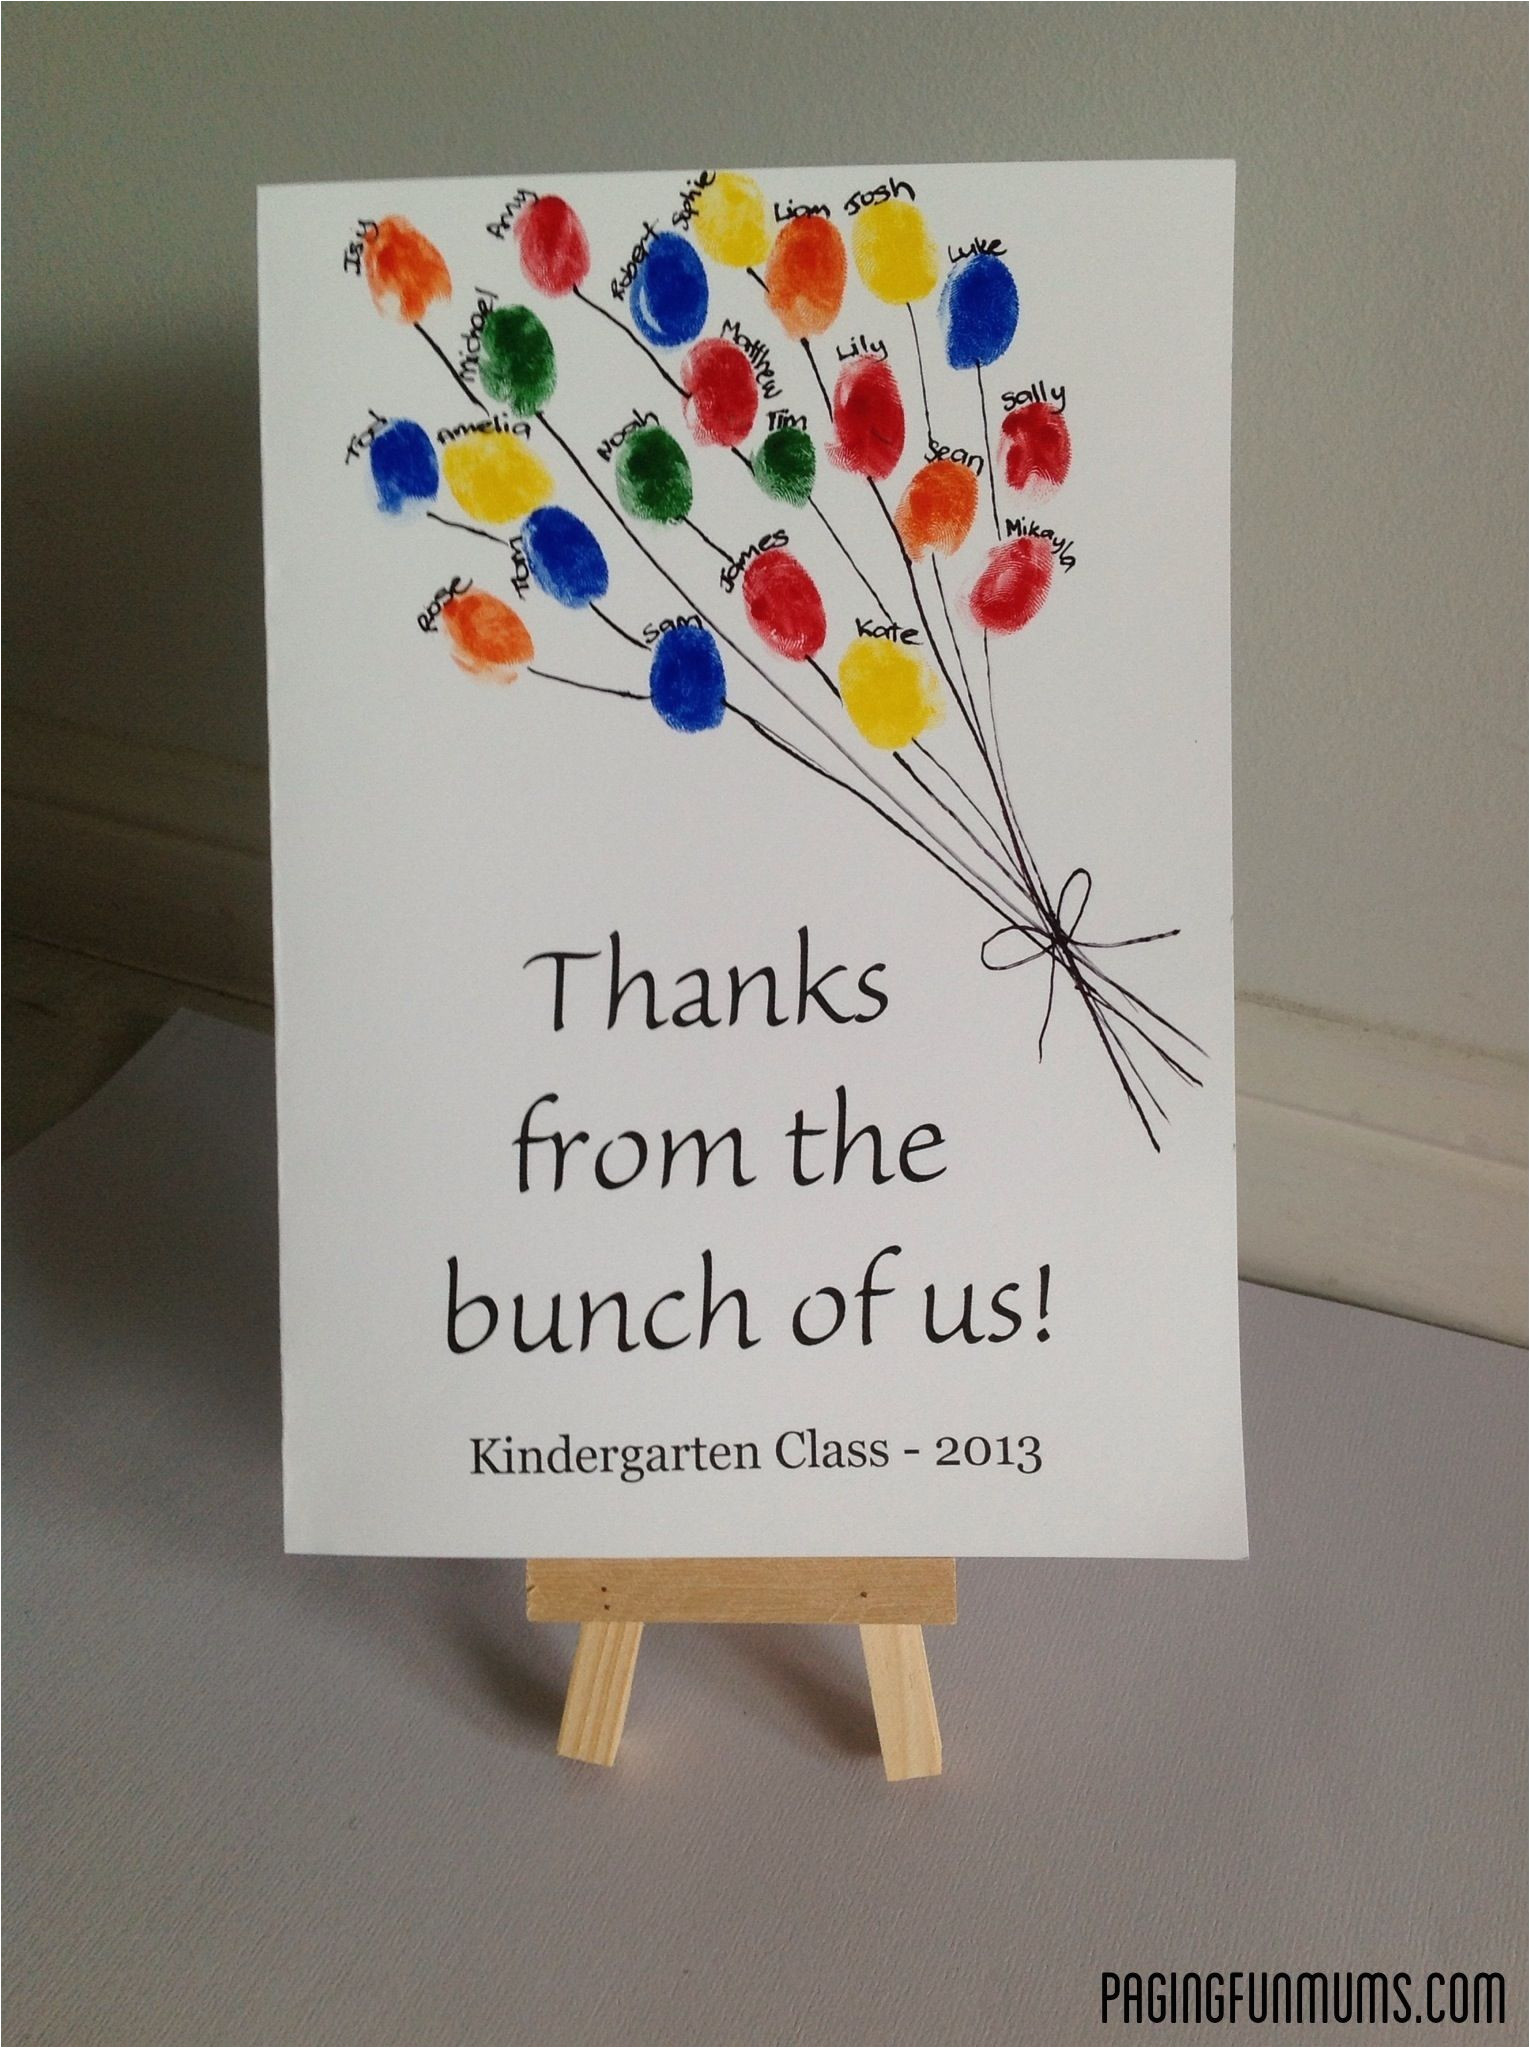 Kindergarten Thank You Card Ideas Teacher Appreciation Card From Class Louise with Images